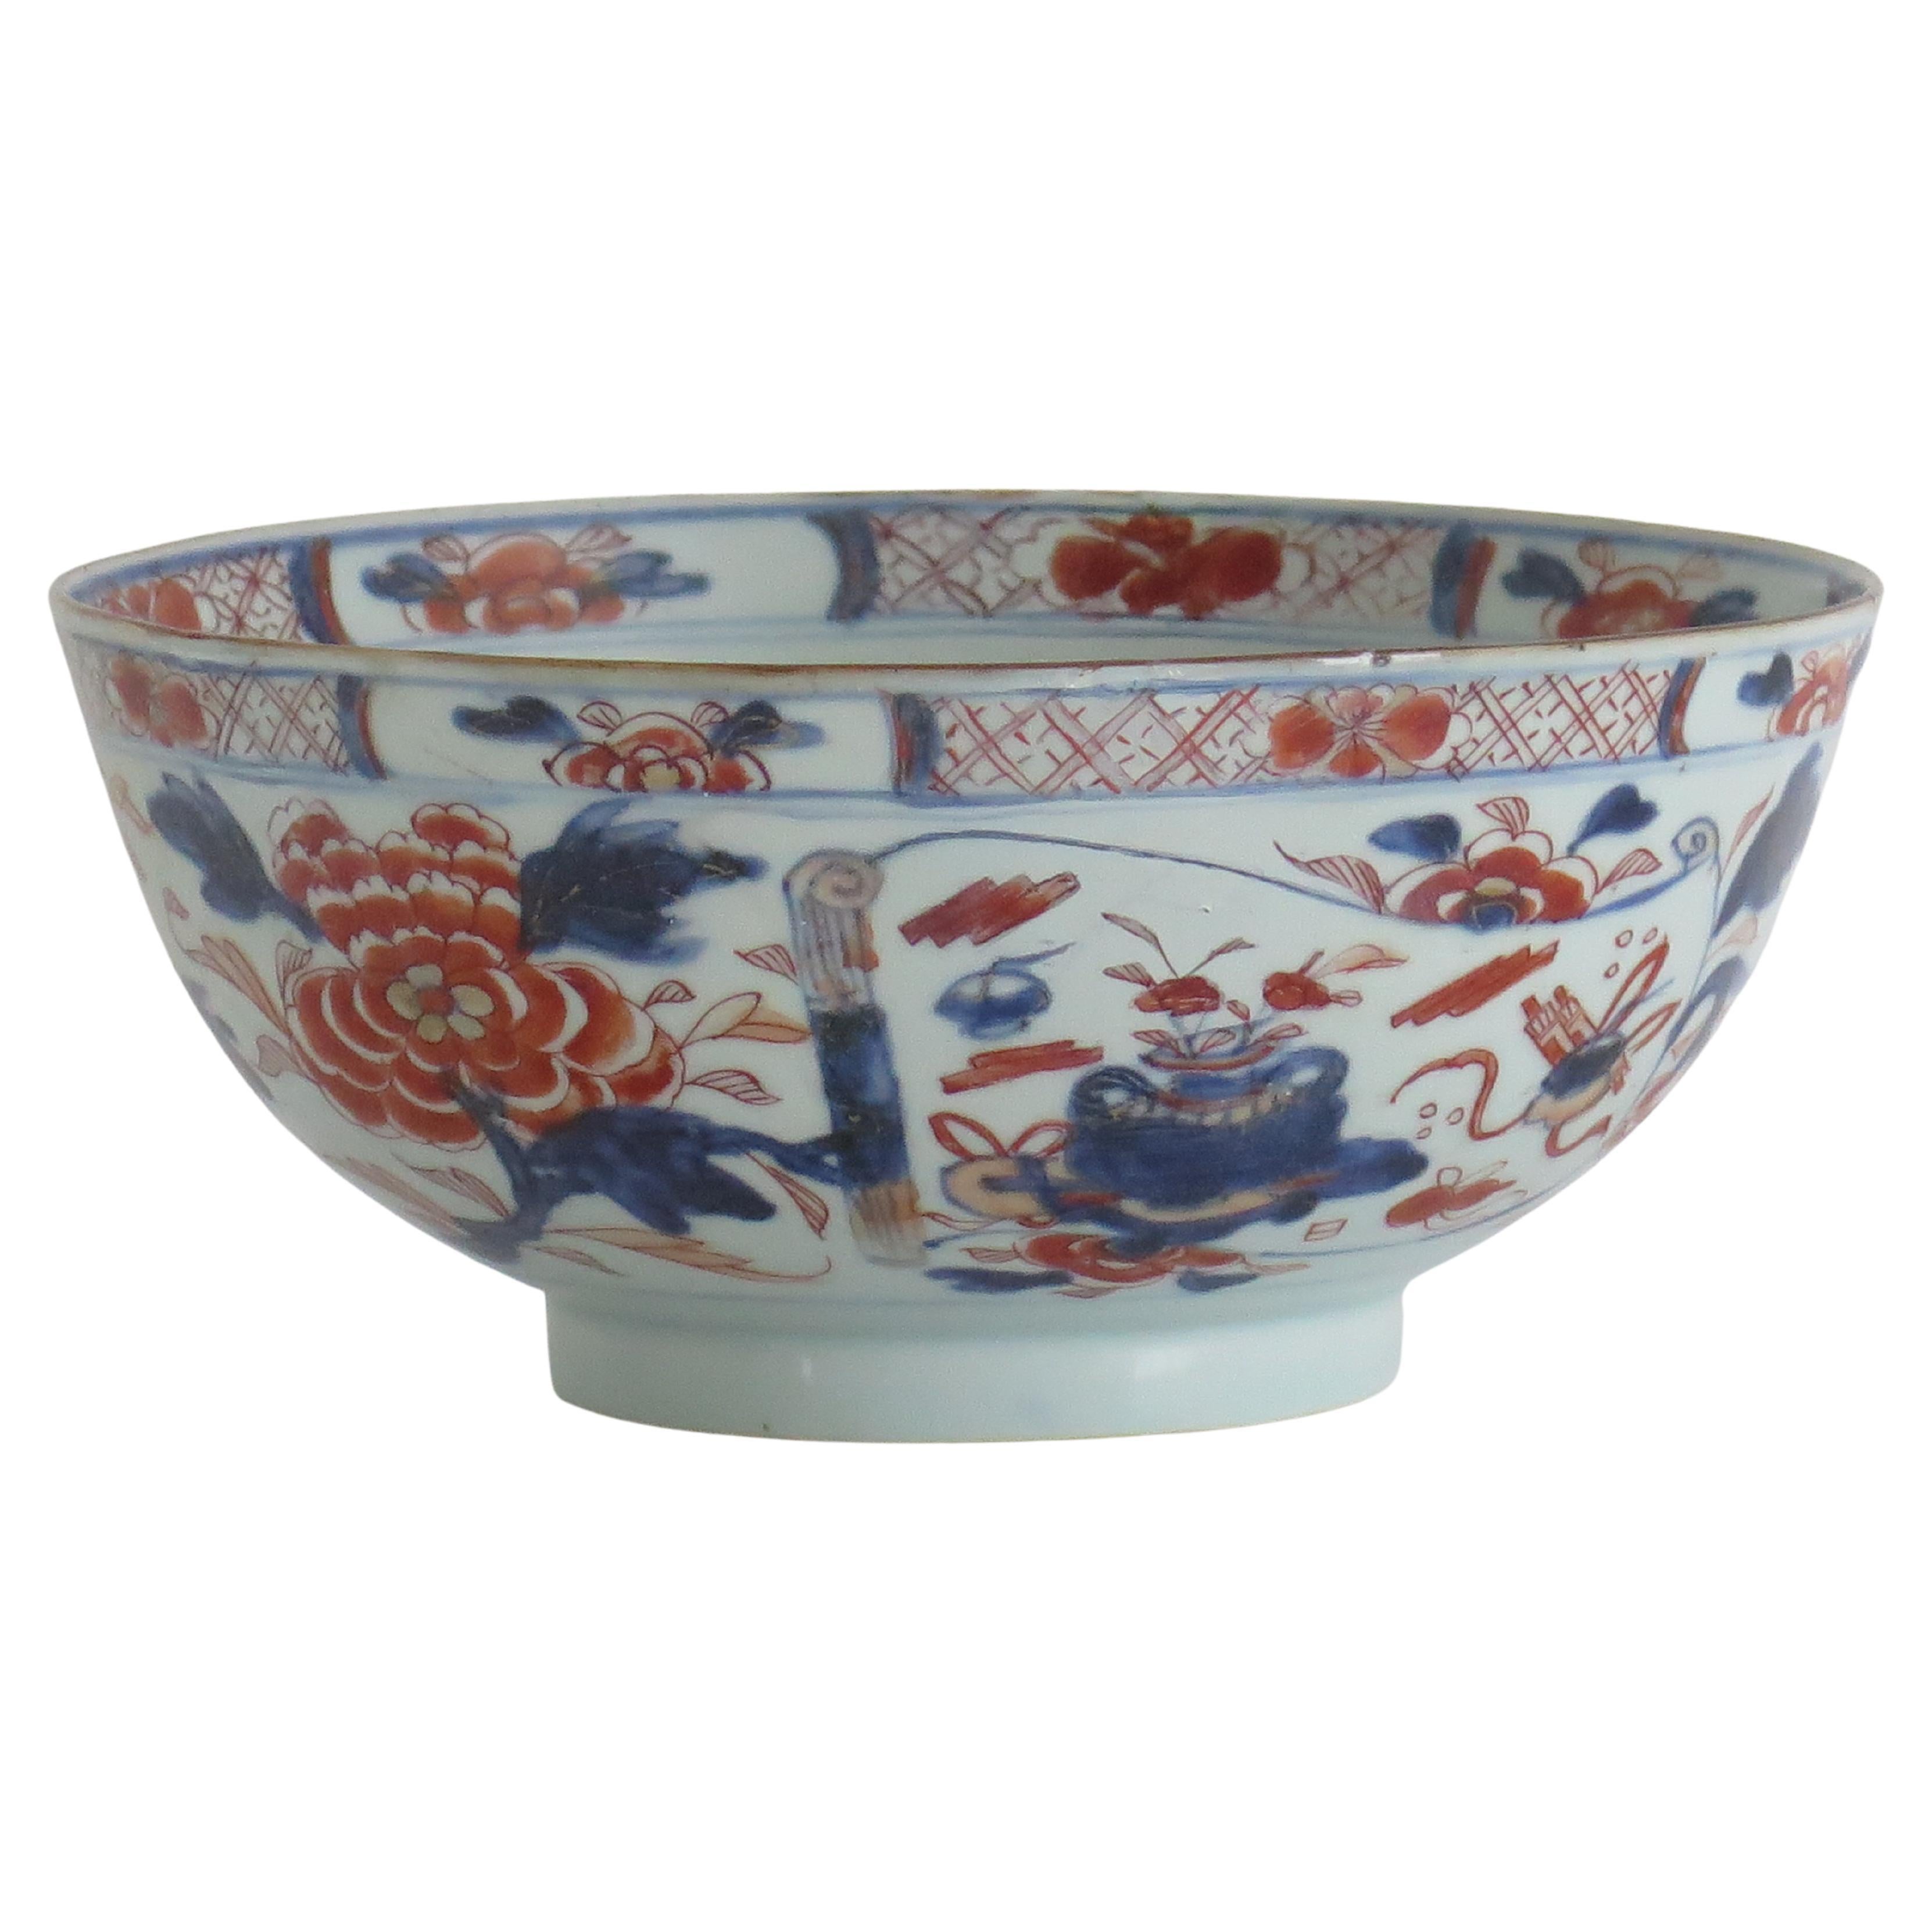 What is an Imari bowl?